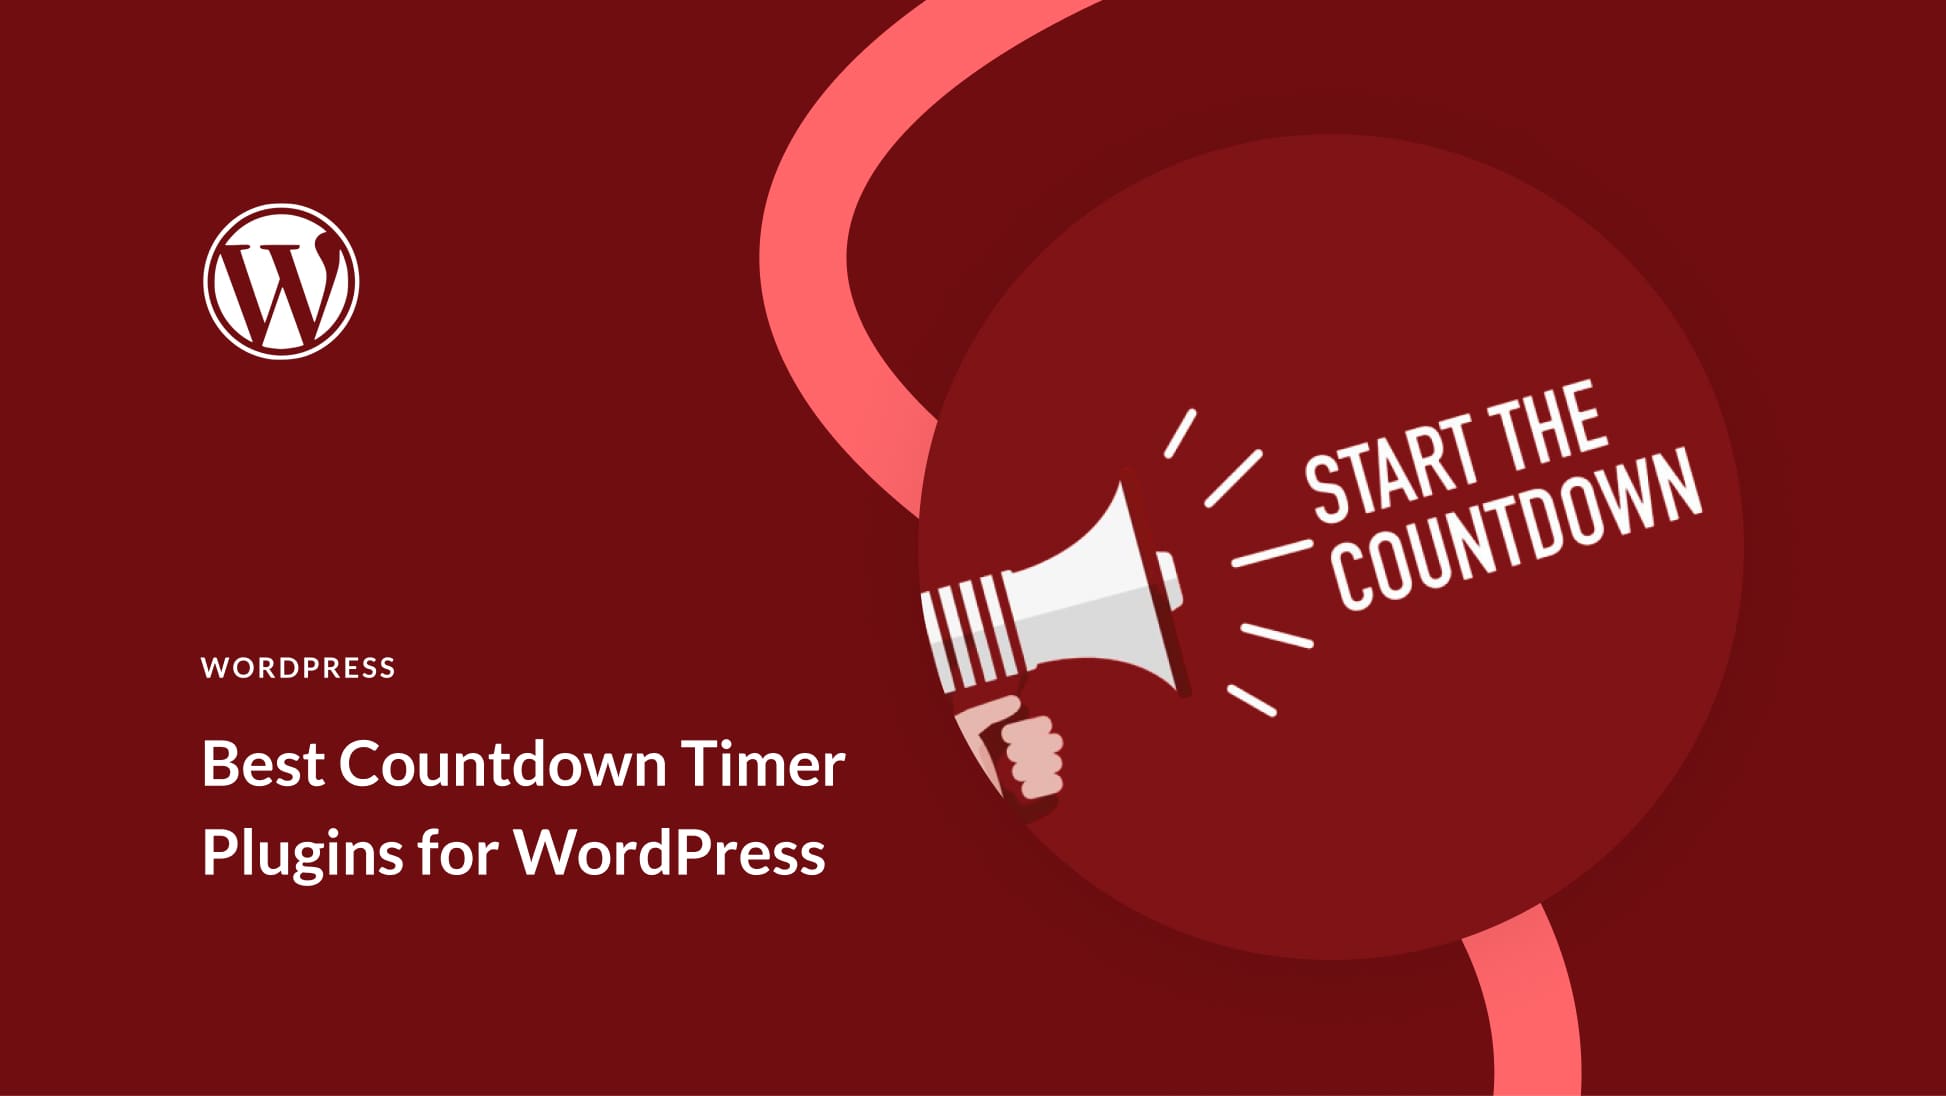 How to Create Scarcity With Countdown Timers in 5 EASY Steps - OptinMonster